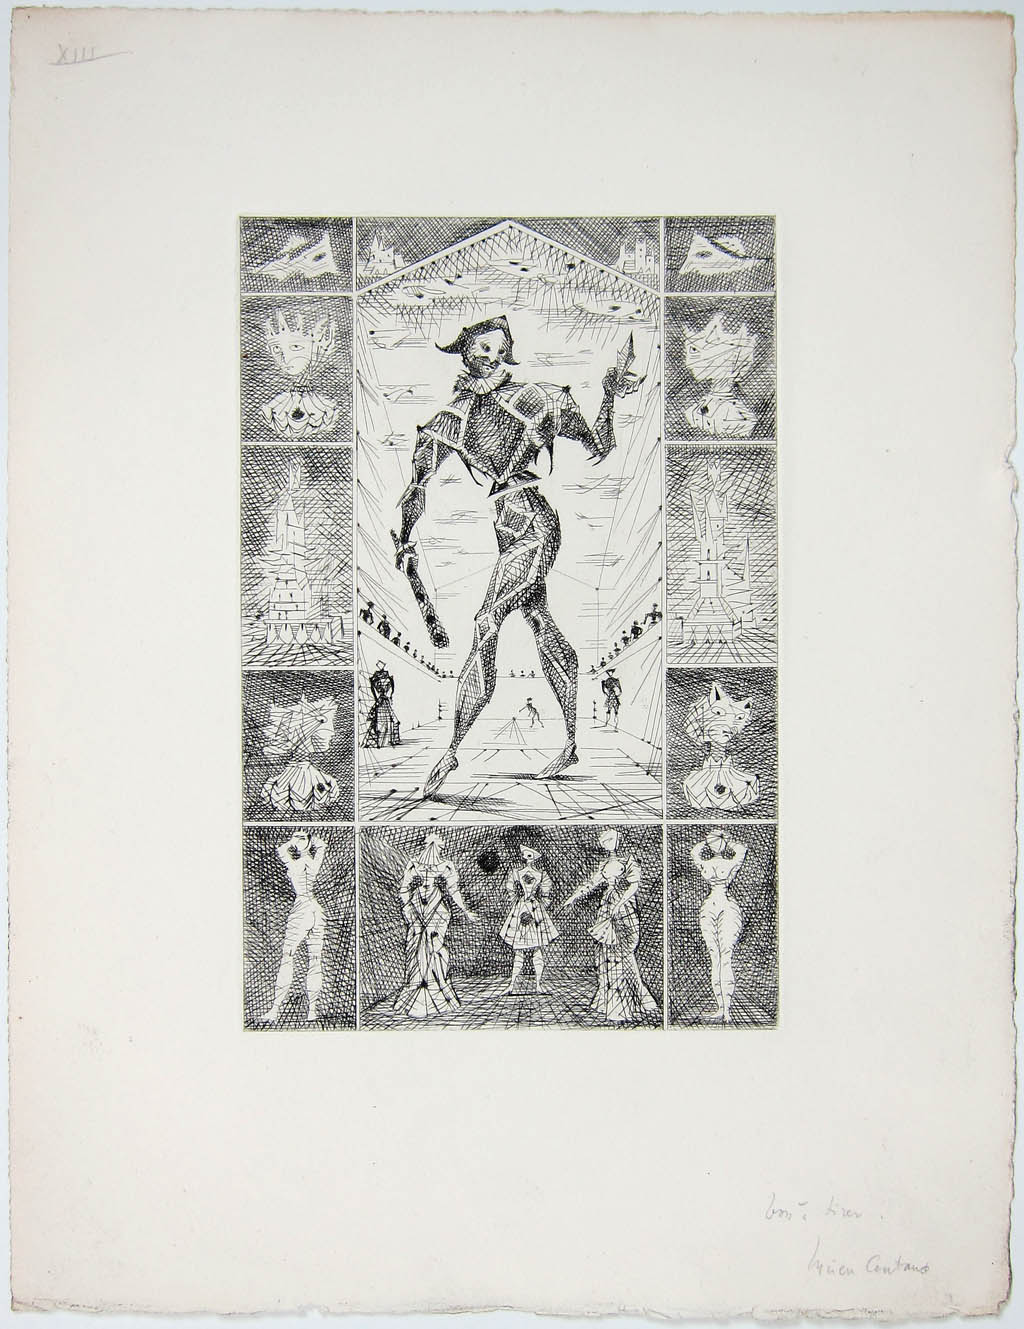 Lucien Coutaud - Le Taureau Blanc (Plate XIII) - 1956 etching